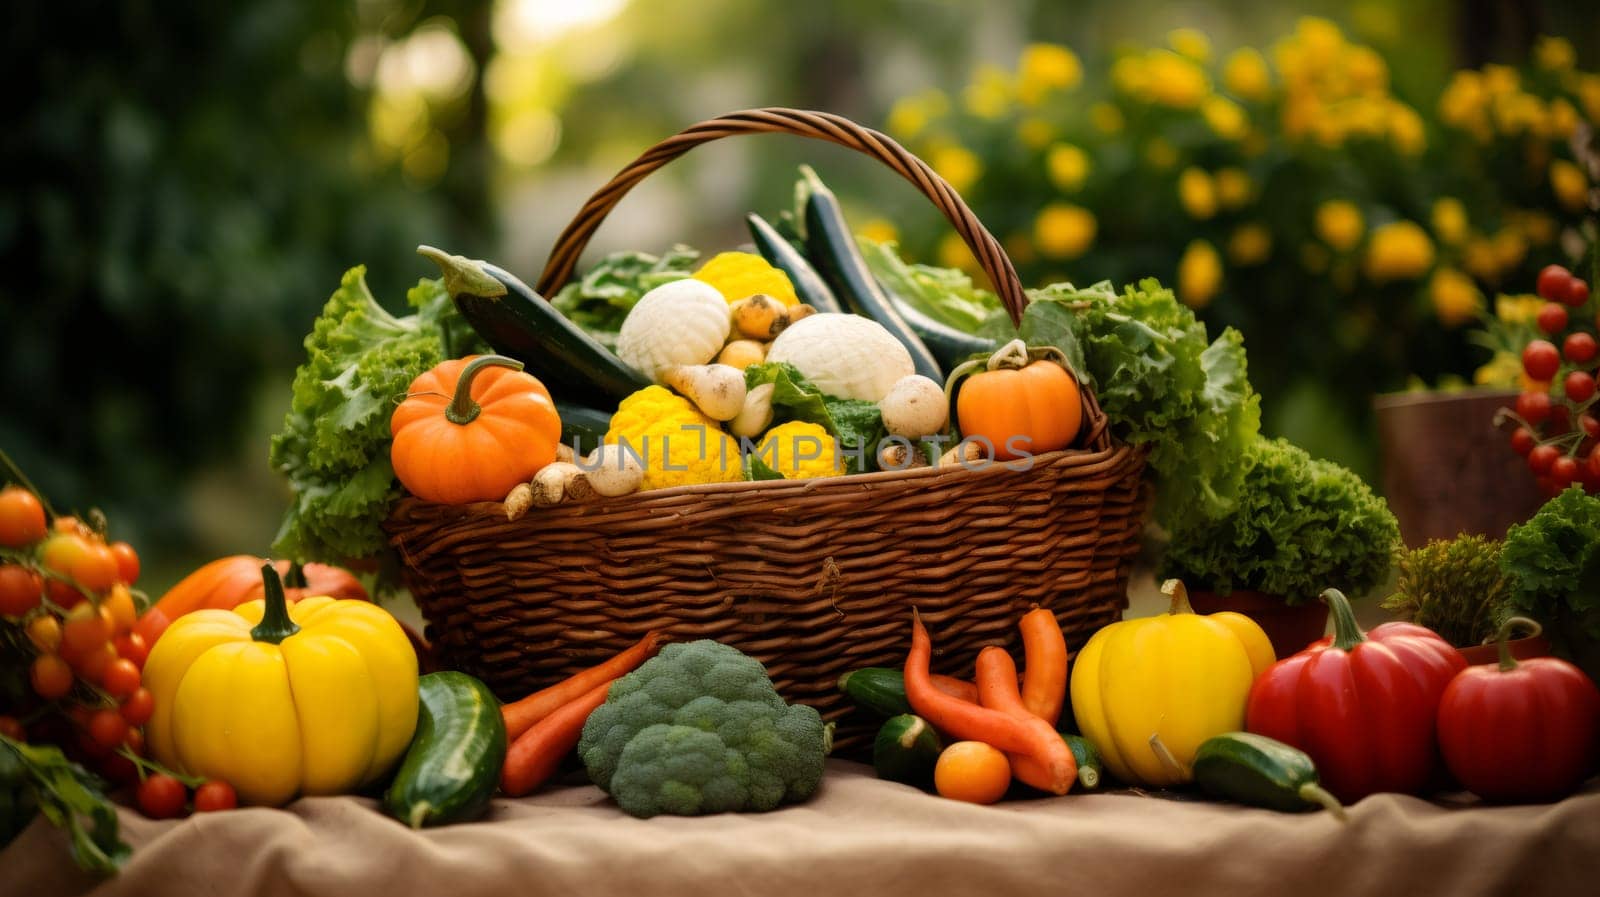 A basket with a variety of autumn seasonal vegetables stands on a wooden table, side view close-up.